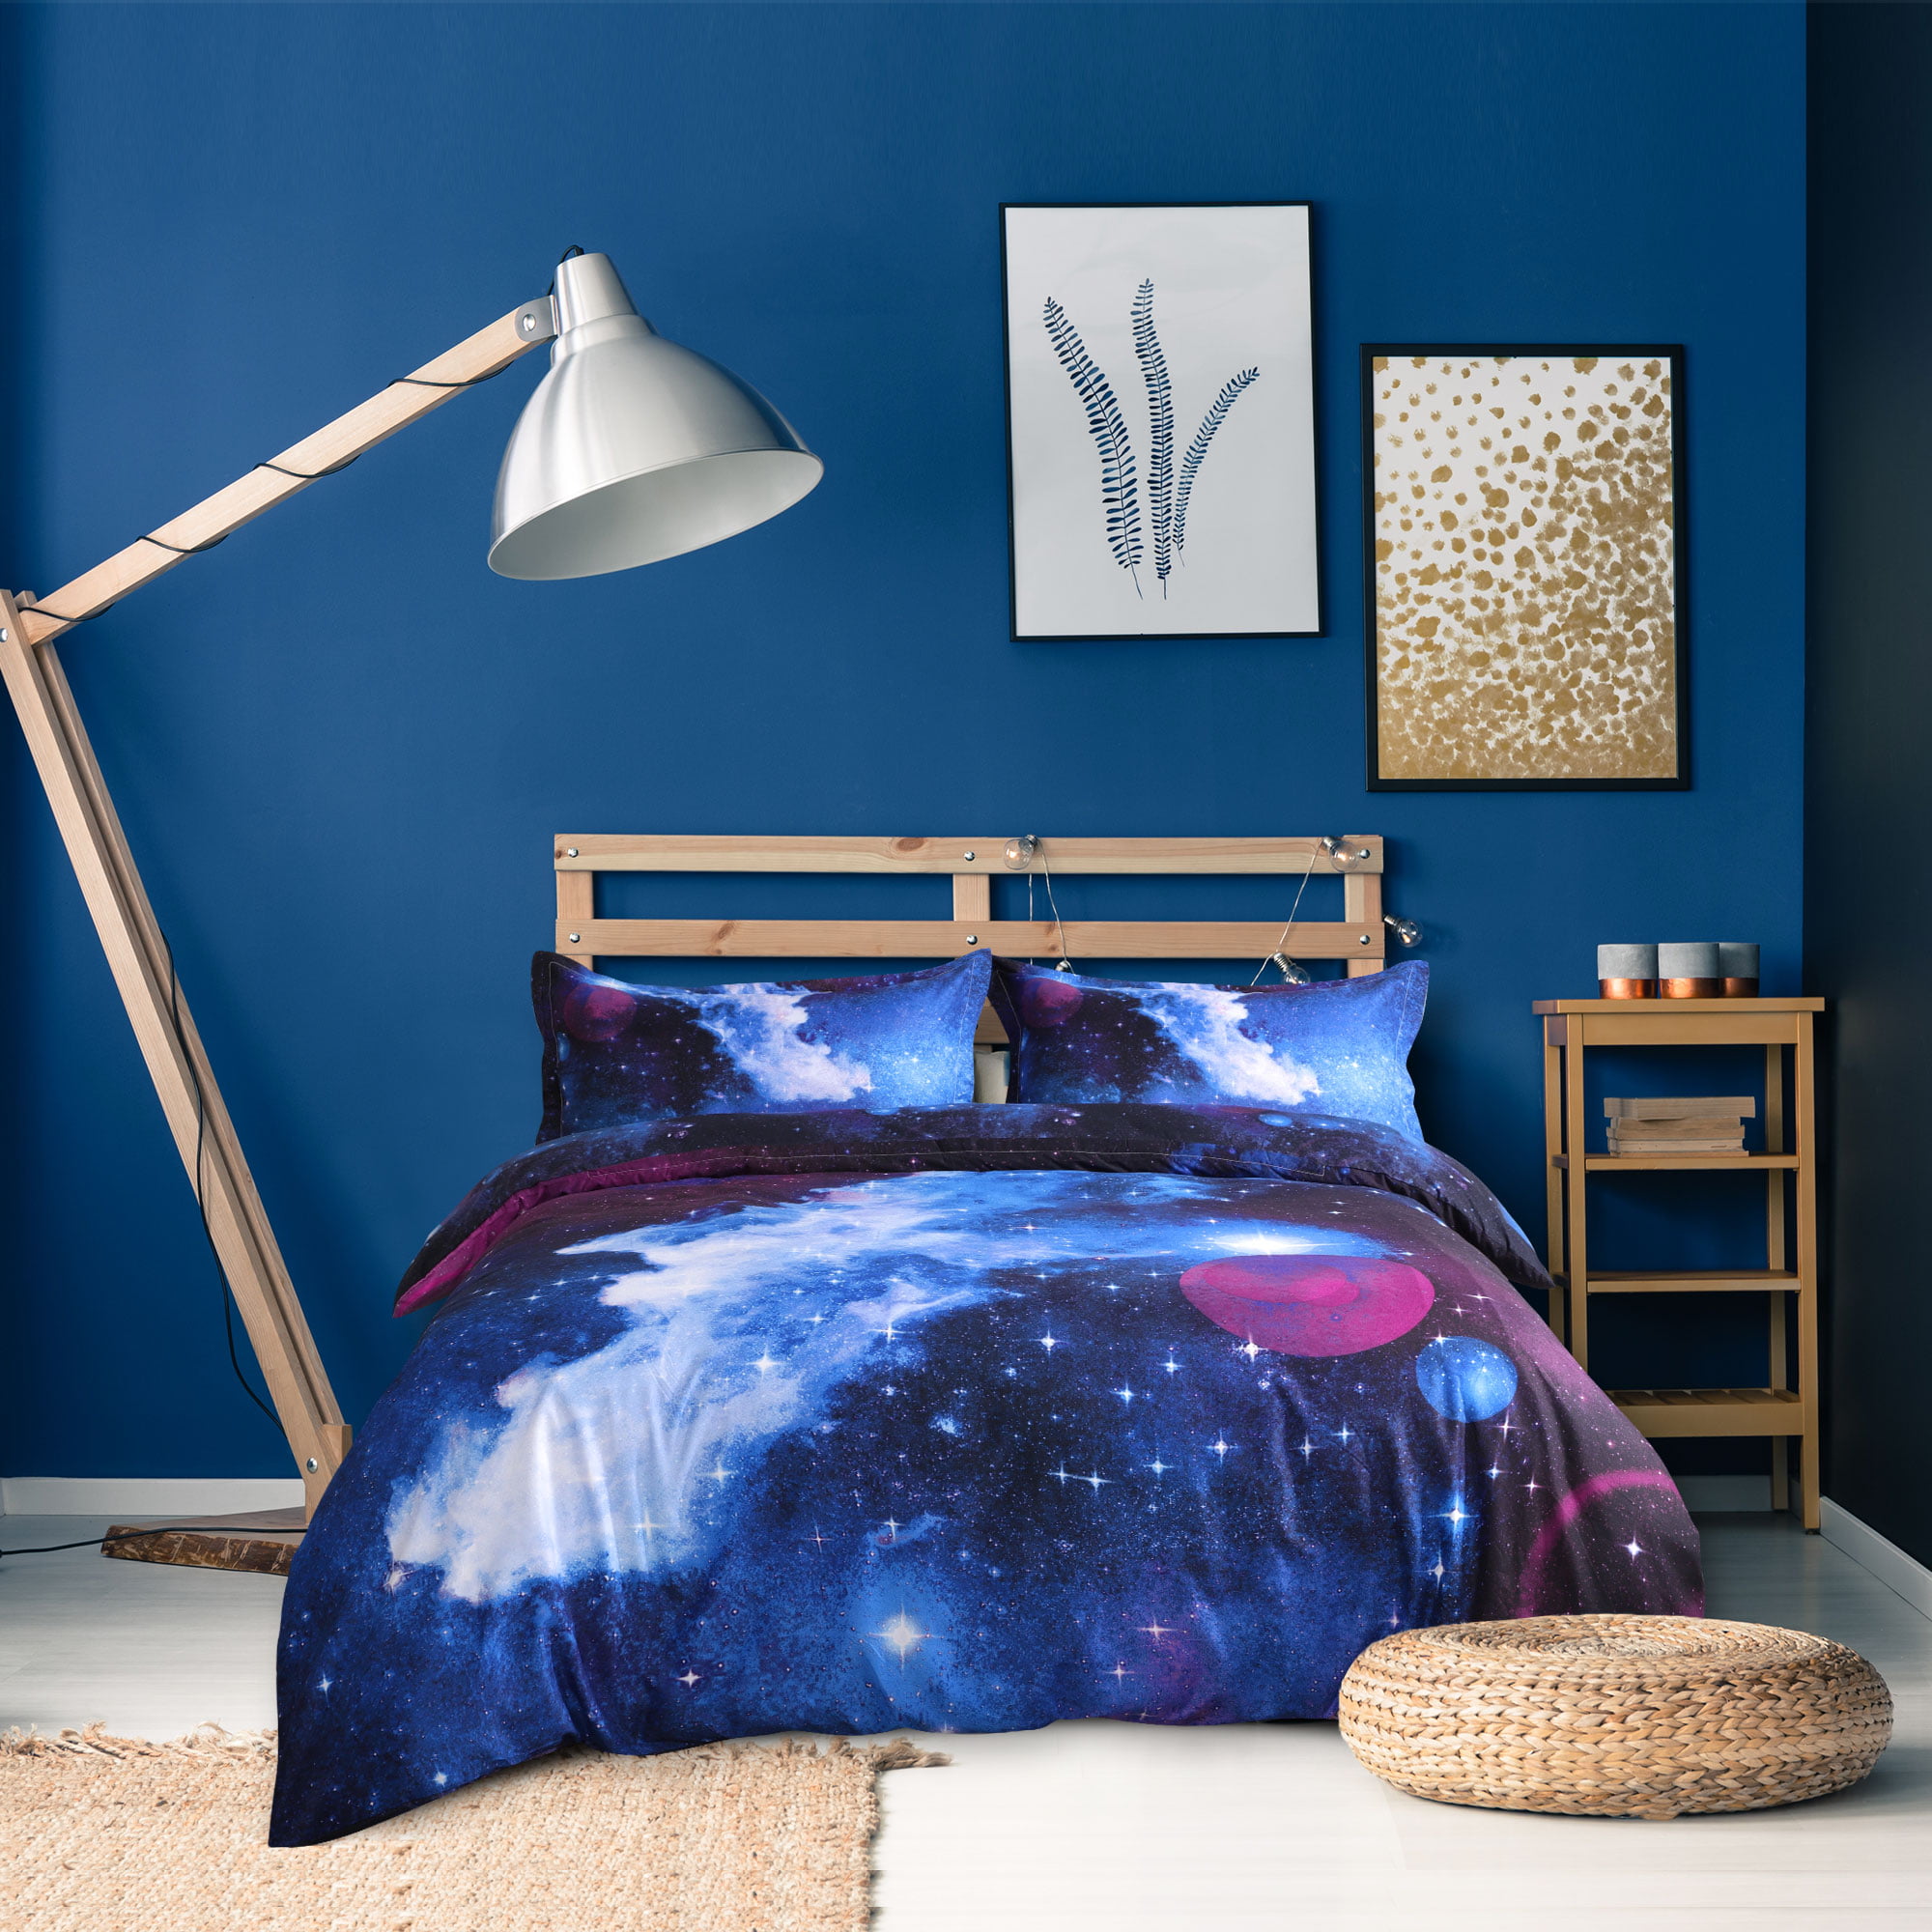 A Nice Night 3D Galaxy Blanket Comforter Bedding Sets Home Textile with Comforte 